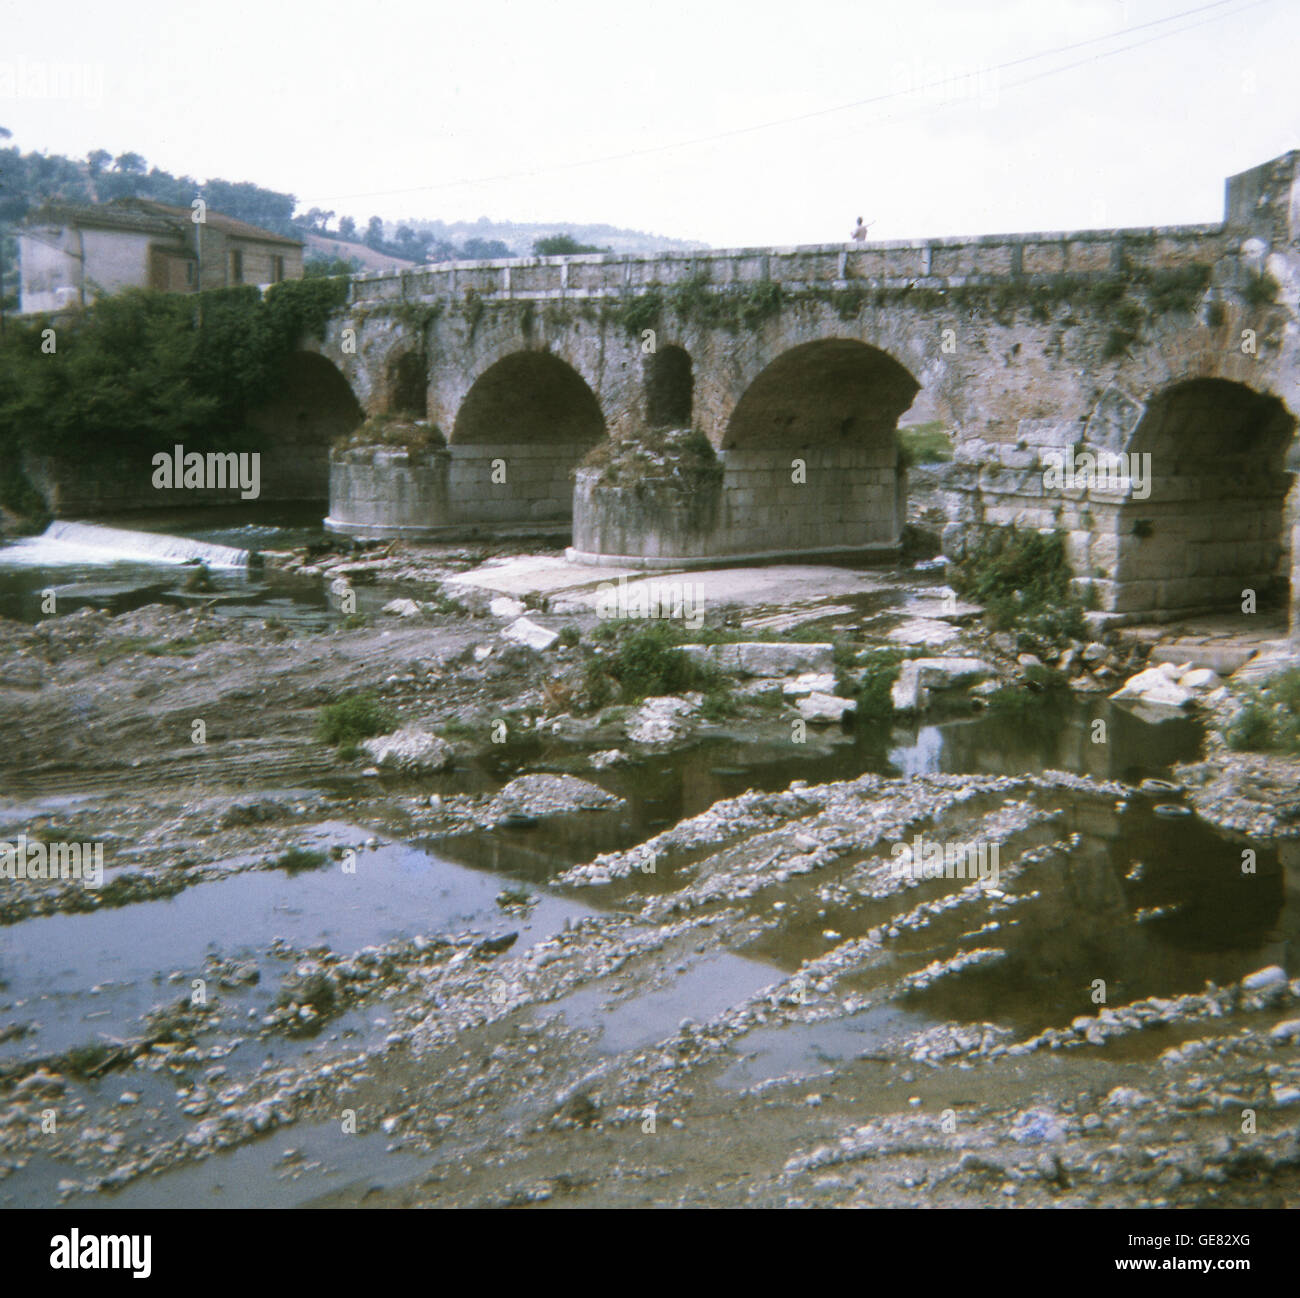 This bridge at Benevento (ancient Beneventum)  in southern Italy, in the region known as Campania, still has a bridge, known as Ponte Leproso, that is used today and dates to Roman times. The openings higher up in the bridge construction allow for extra water to flow through in times of flooding. The bridge was on the famed and well-used Via Appia (Appian Way) that led from Brindisi (ancient Brundisium) to Rome. The bridge crosses th Sabato River and is considered a marvel of Roman engineering and ingenuity. This photo was taken in the summer of 1970. Stock Photo